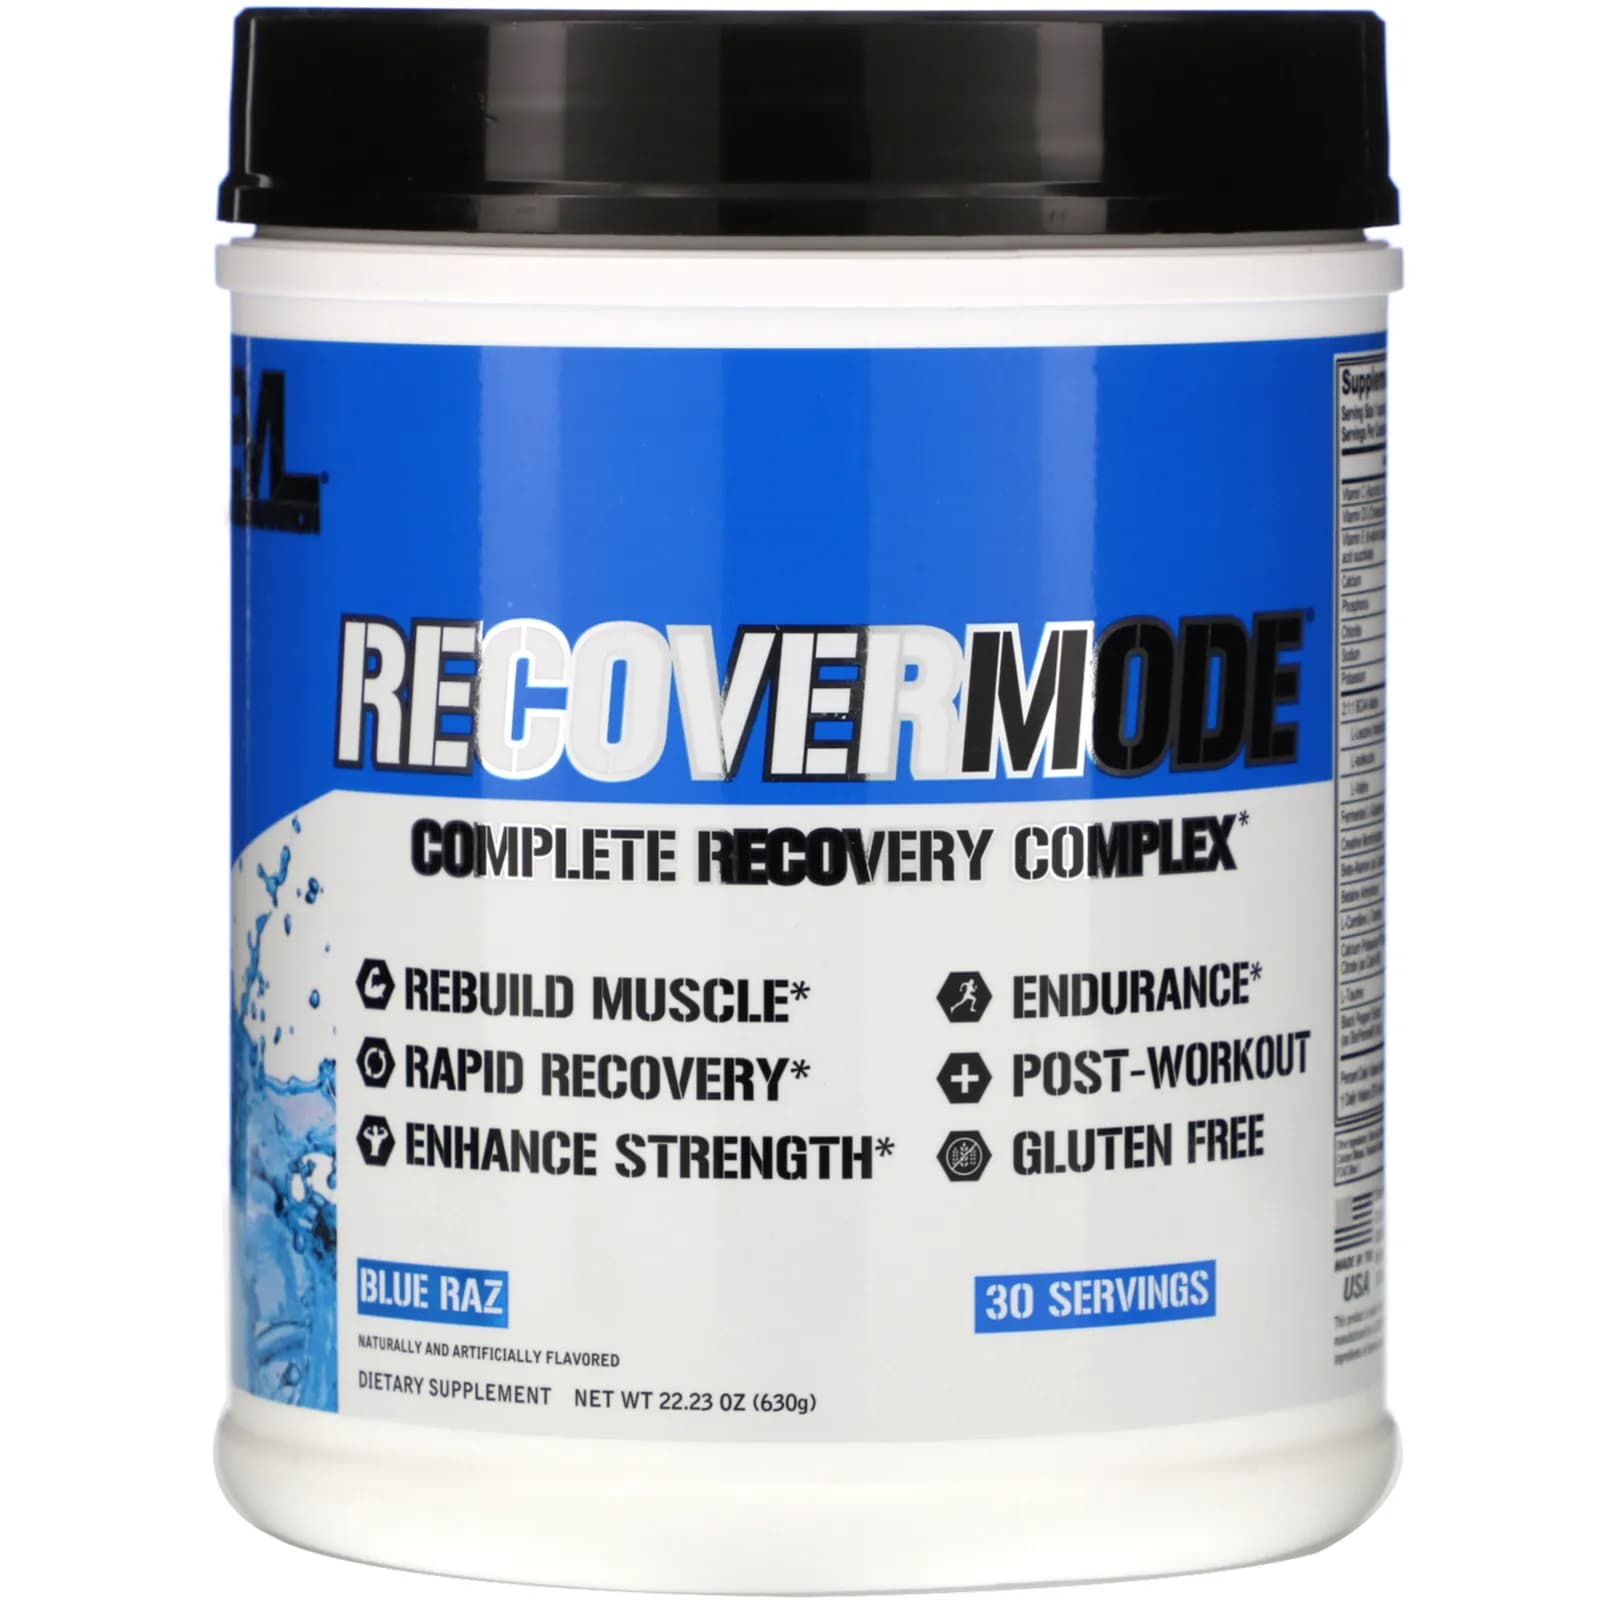 Evl Recover Mode Complete Recovery Complex 630g Blue Raspberry (Buy 2 Get 1 Free)